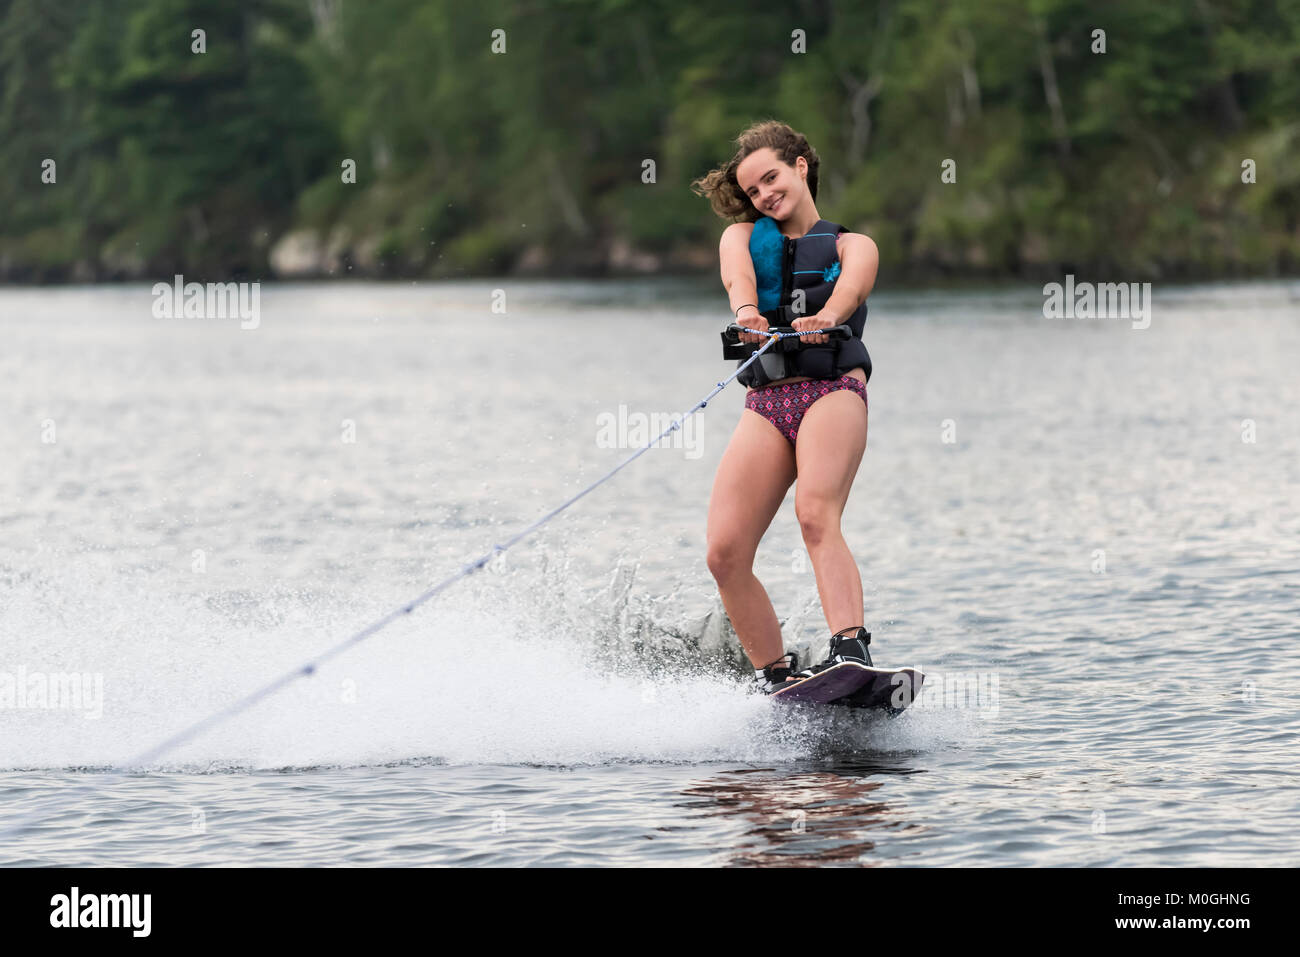 A teenage girl wakeboarding behind a boat on a lake; Lake of the Woods, Ontario, Canada Stock Photo